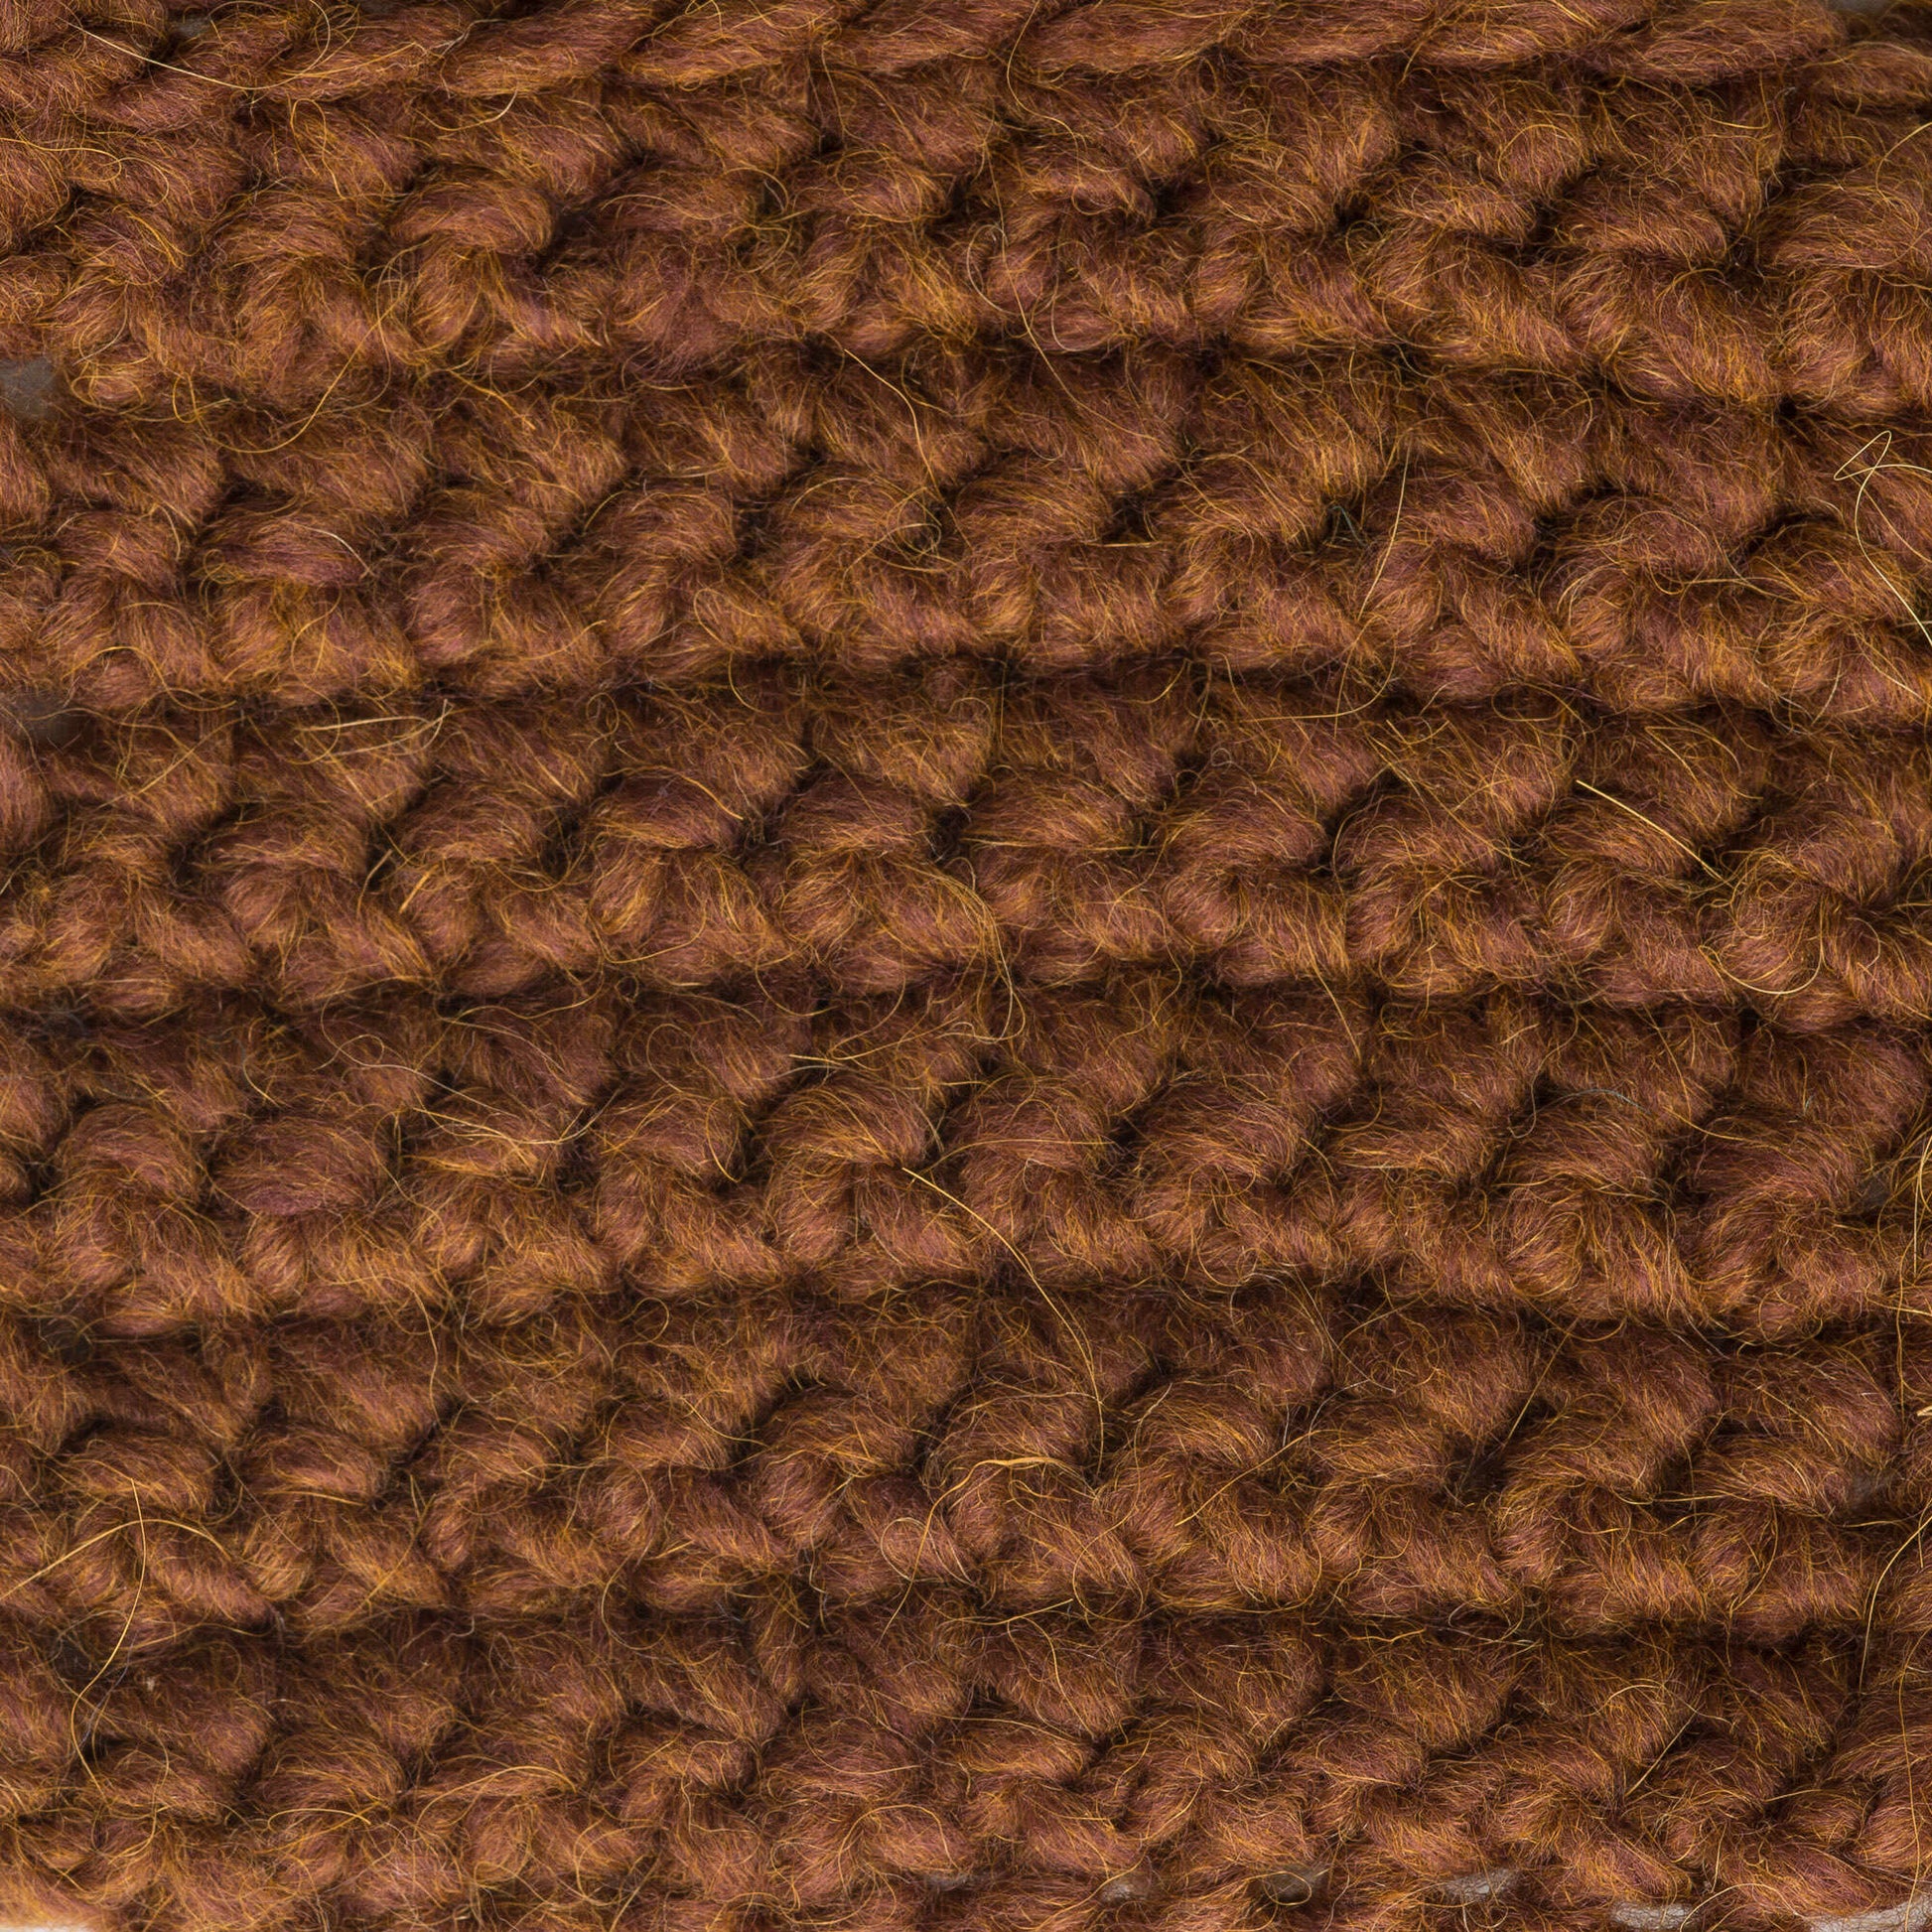 Patons Alpaca Blend Yarn - Discontinued Shades Toffee